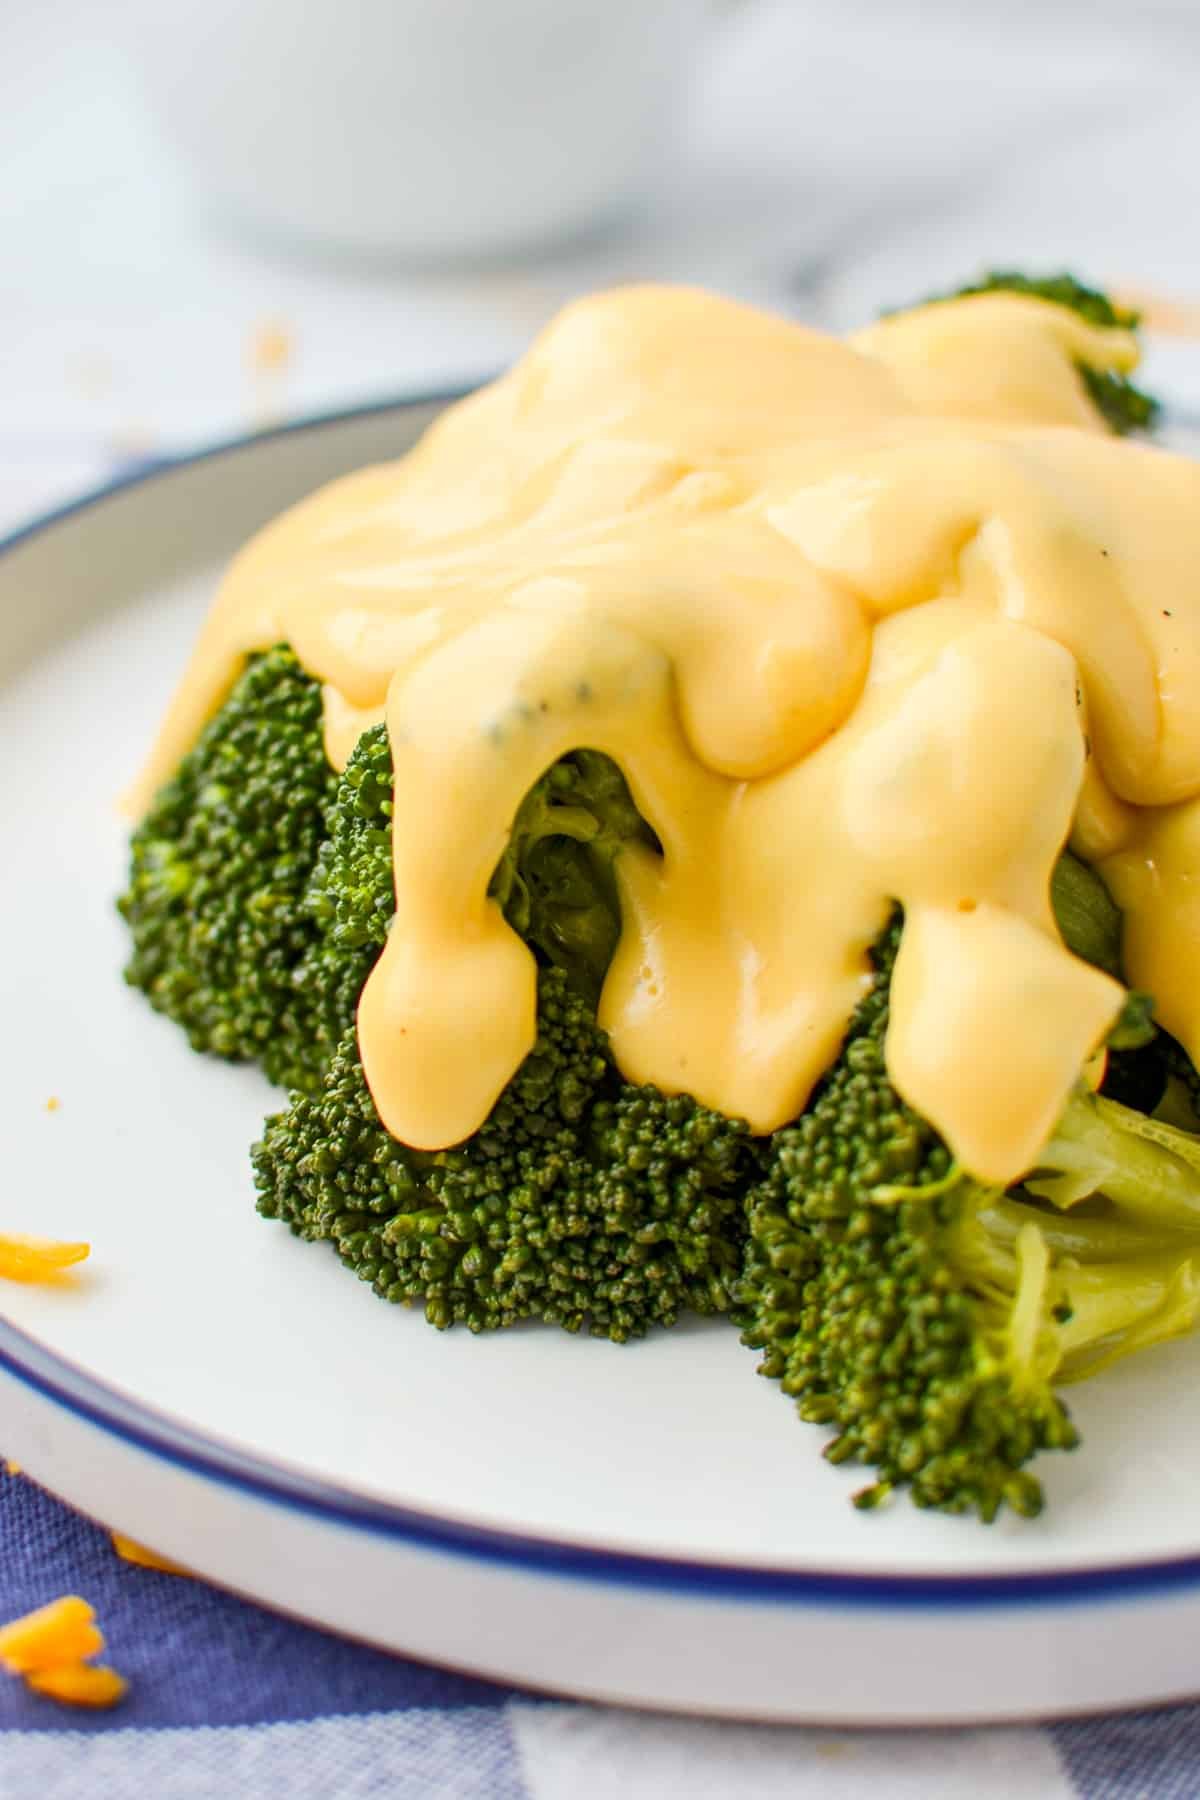 Cheese sauce poured on top of broccoli.